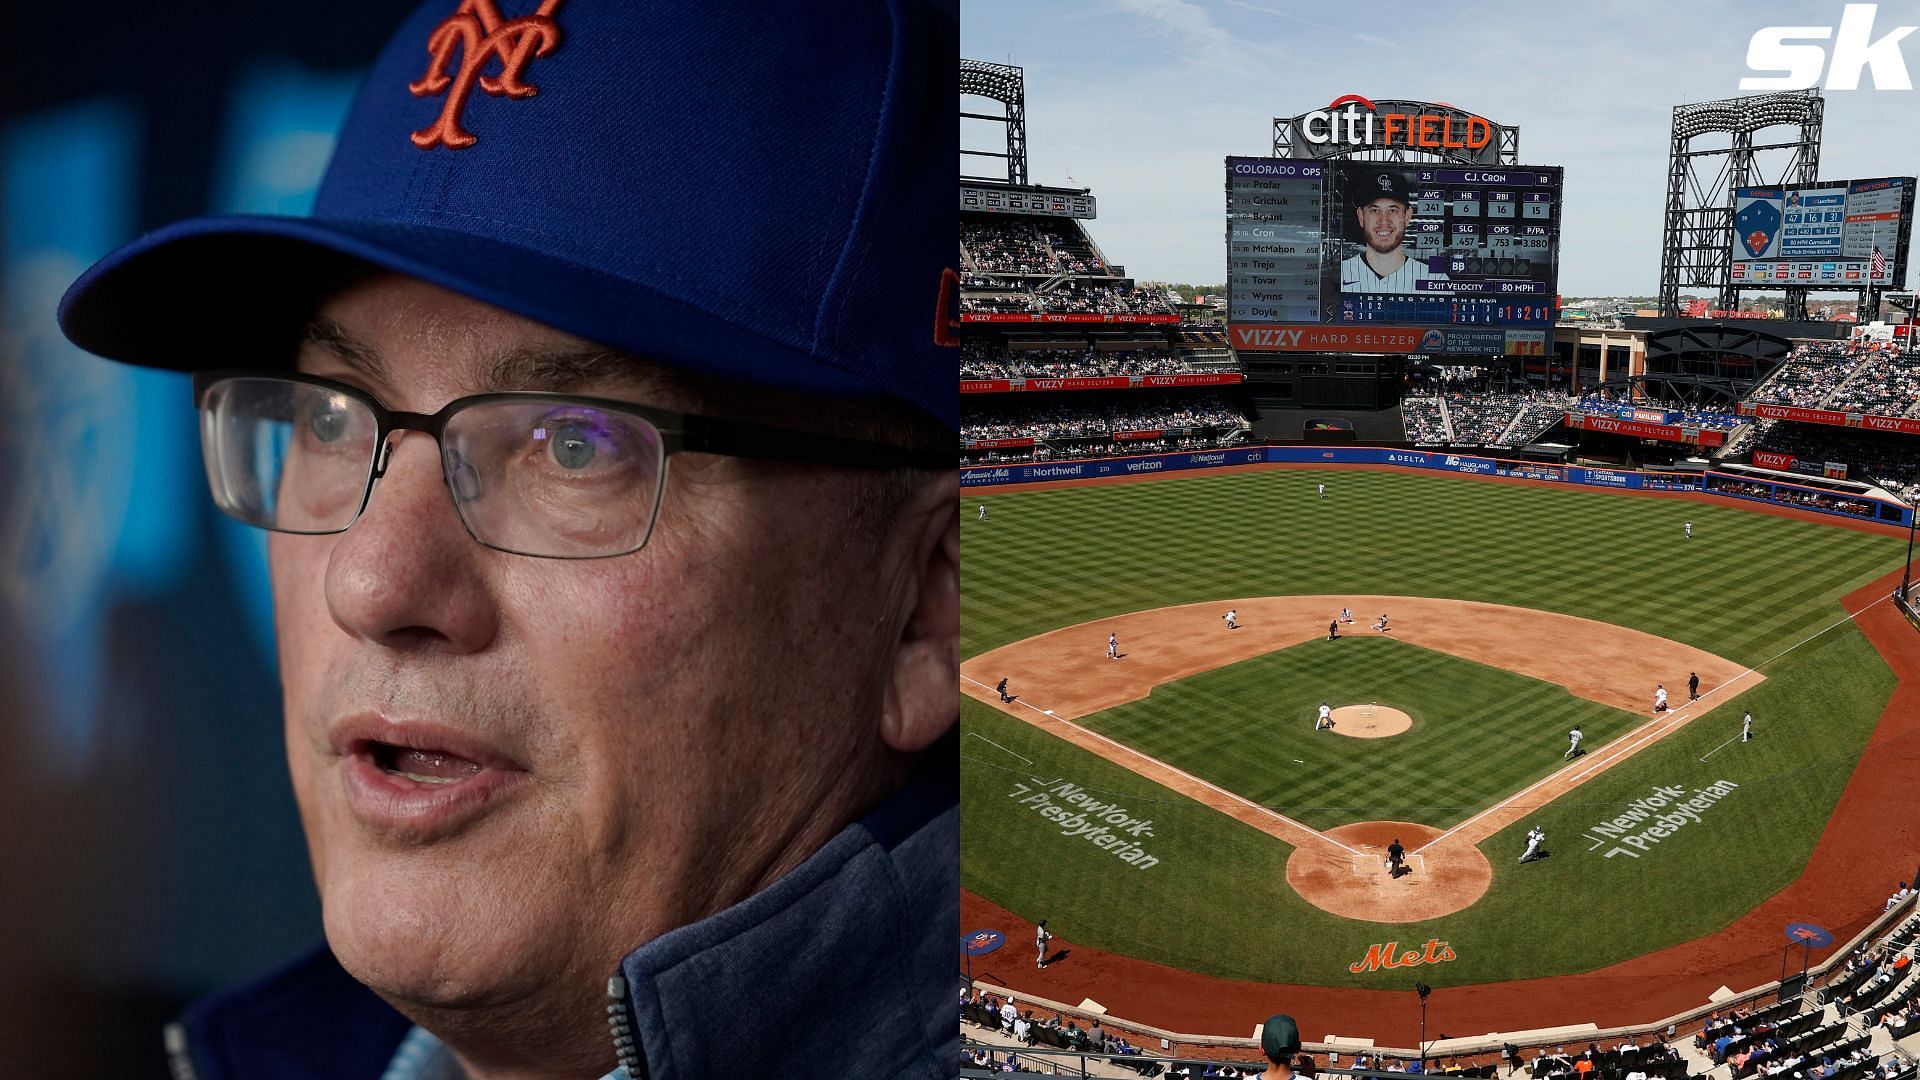 Mets owner Steve Cohen stands by $8,000,000,000 plan to expand Citi Field